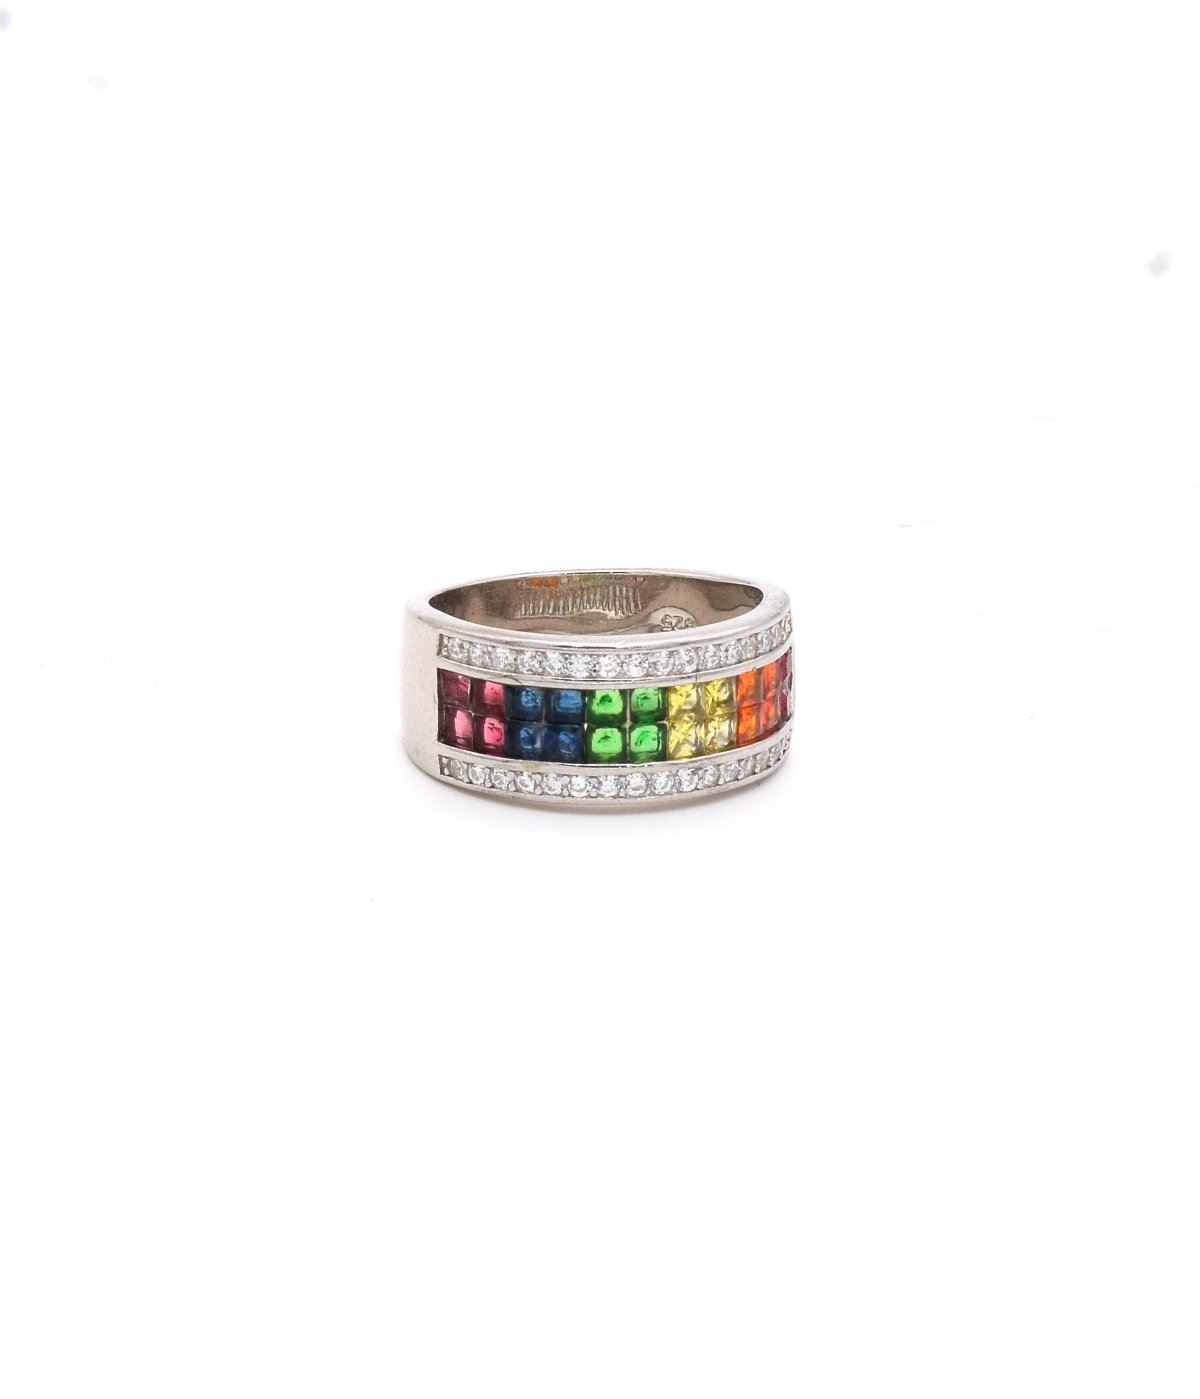 92.5 SILVER TRADITIONAL MULTI STONE FINGER RING FOR GIRLS AND COUPLES